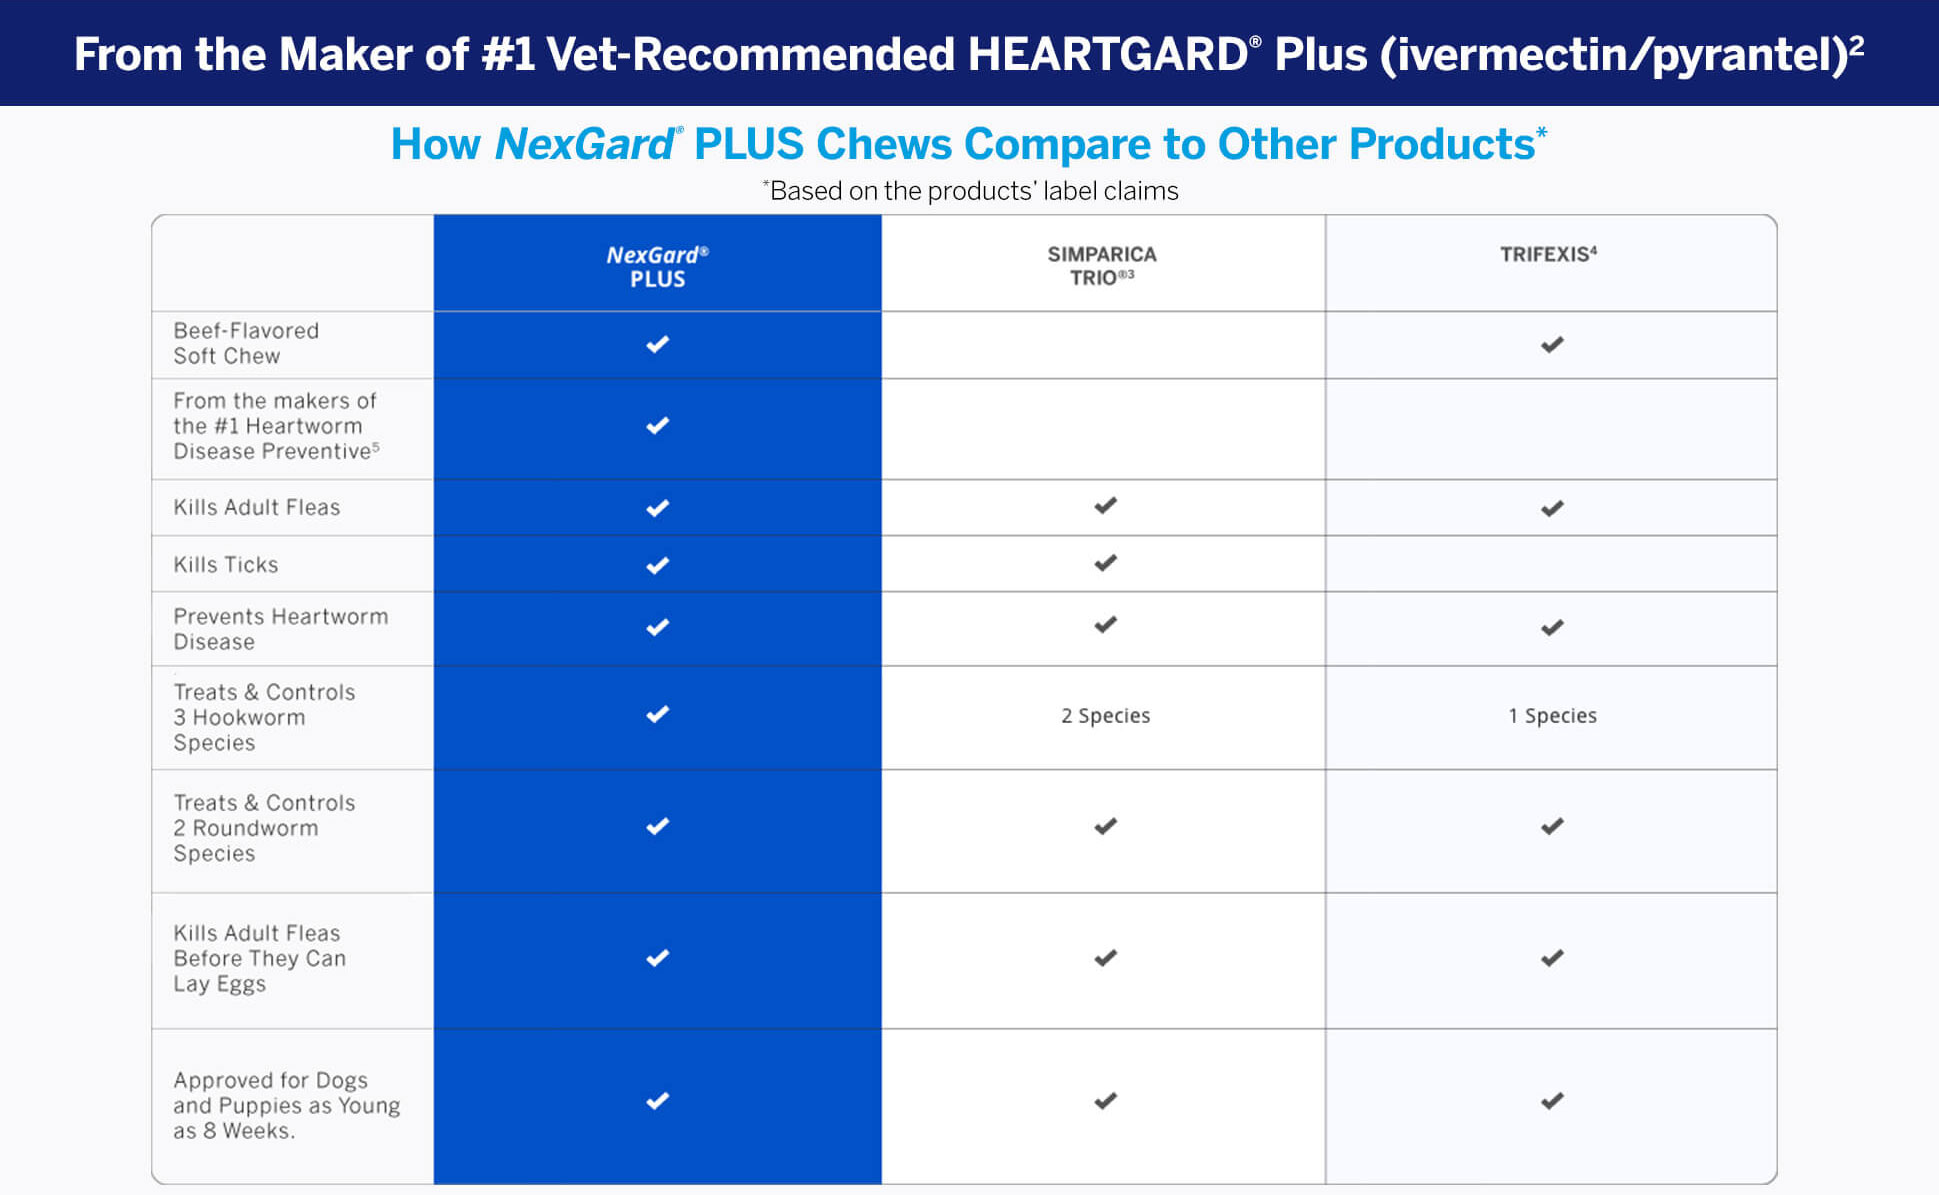 From the Maker of #1 Vet-Recommended HEARTGARD® Plus (ivermectin/pyrantel)